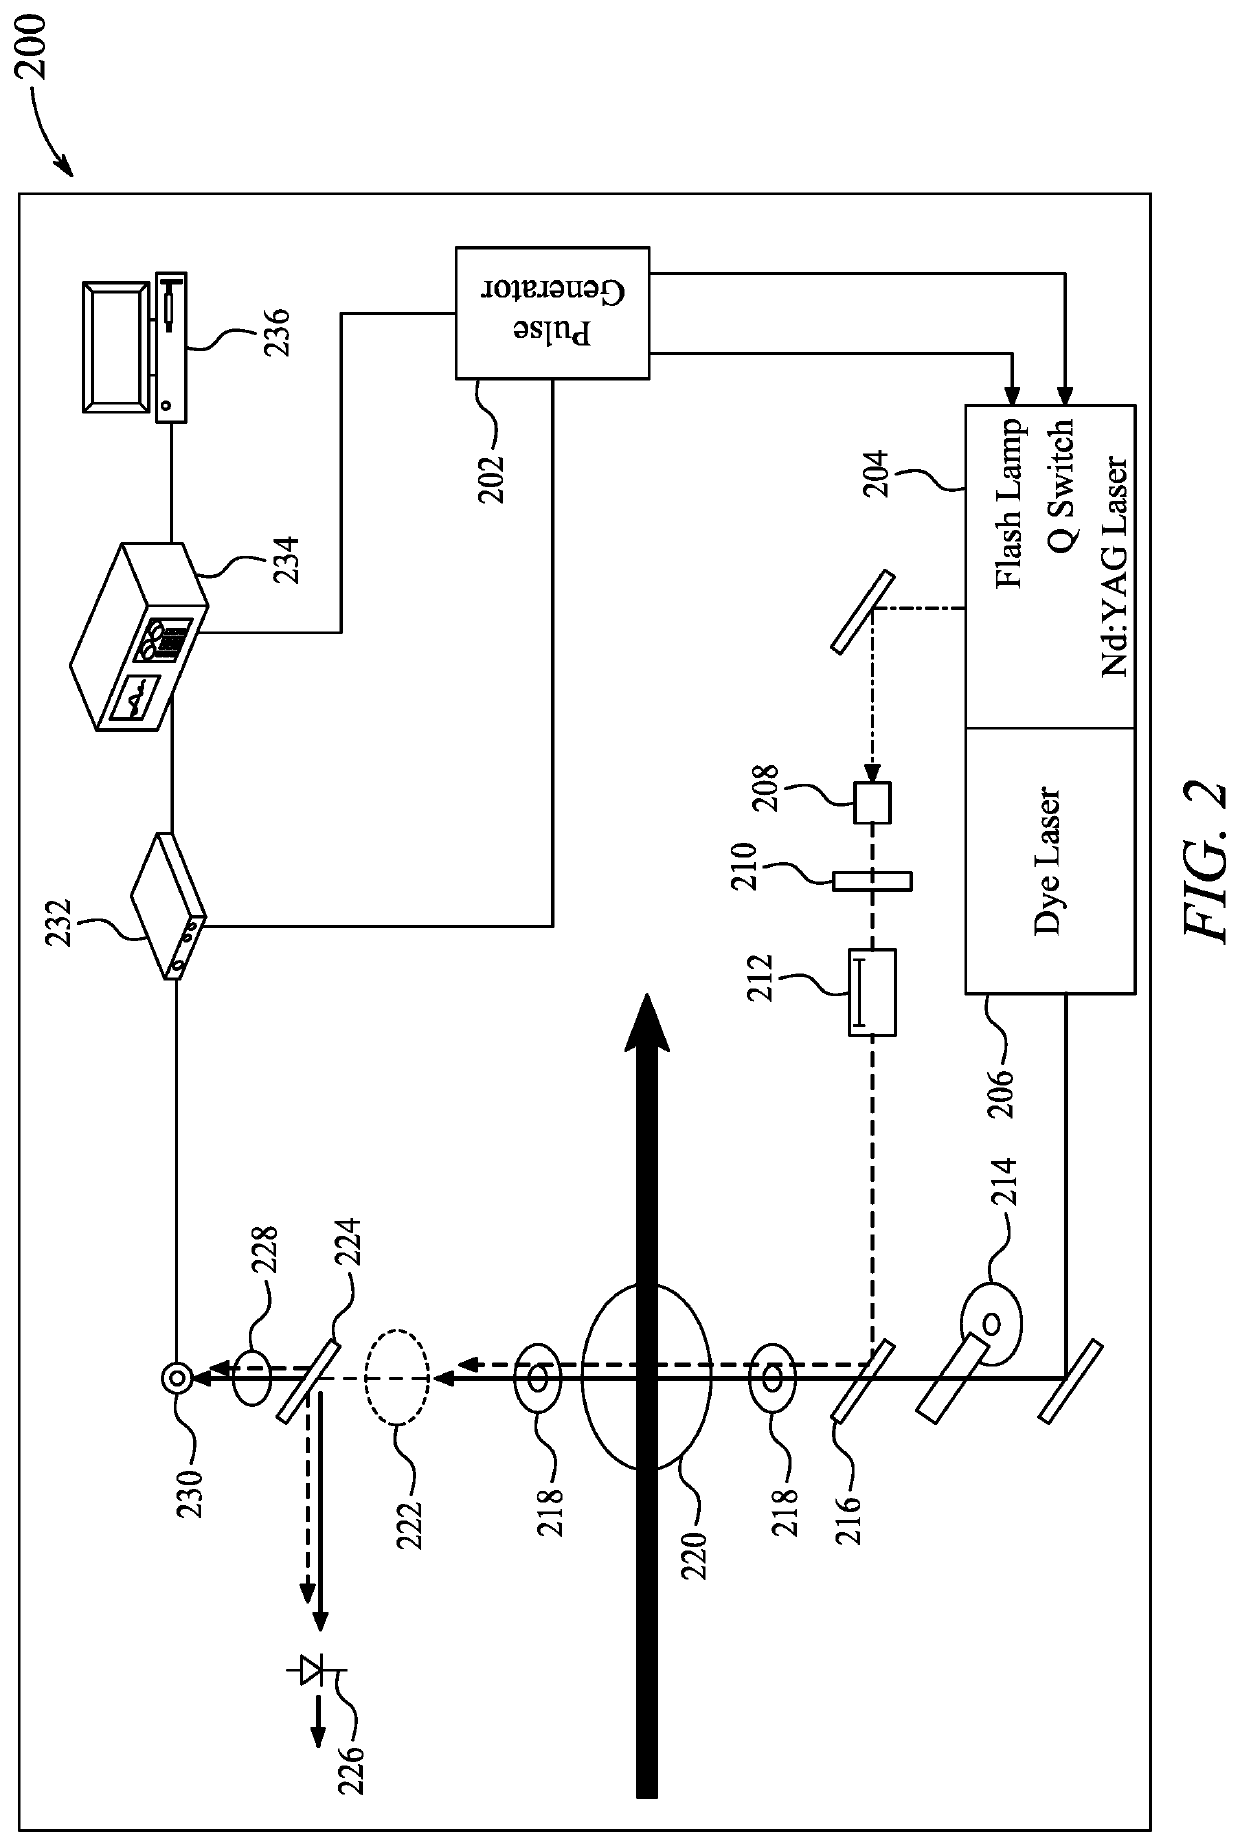 Energy meter circuit for short and low-intensity laser pulses